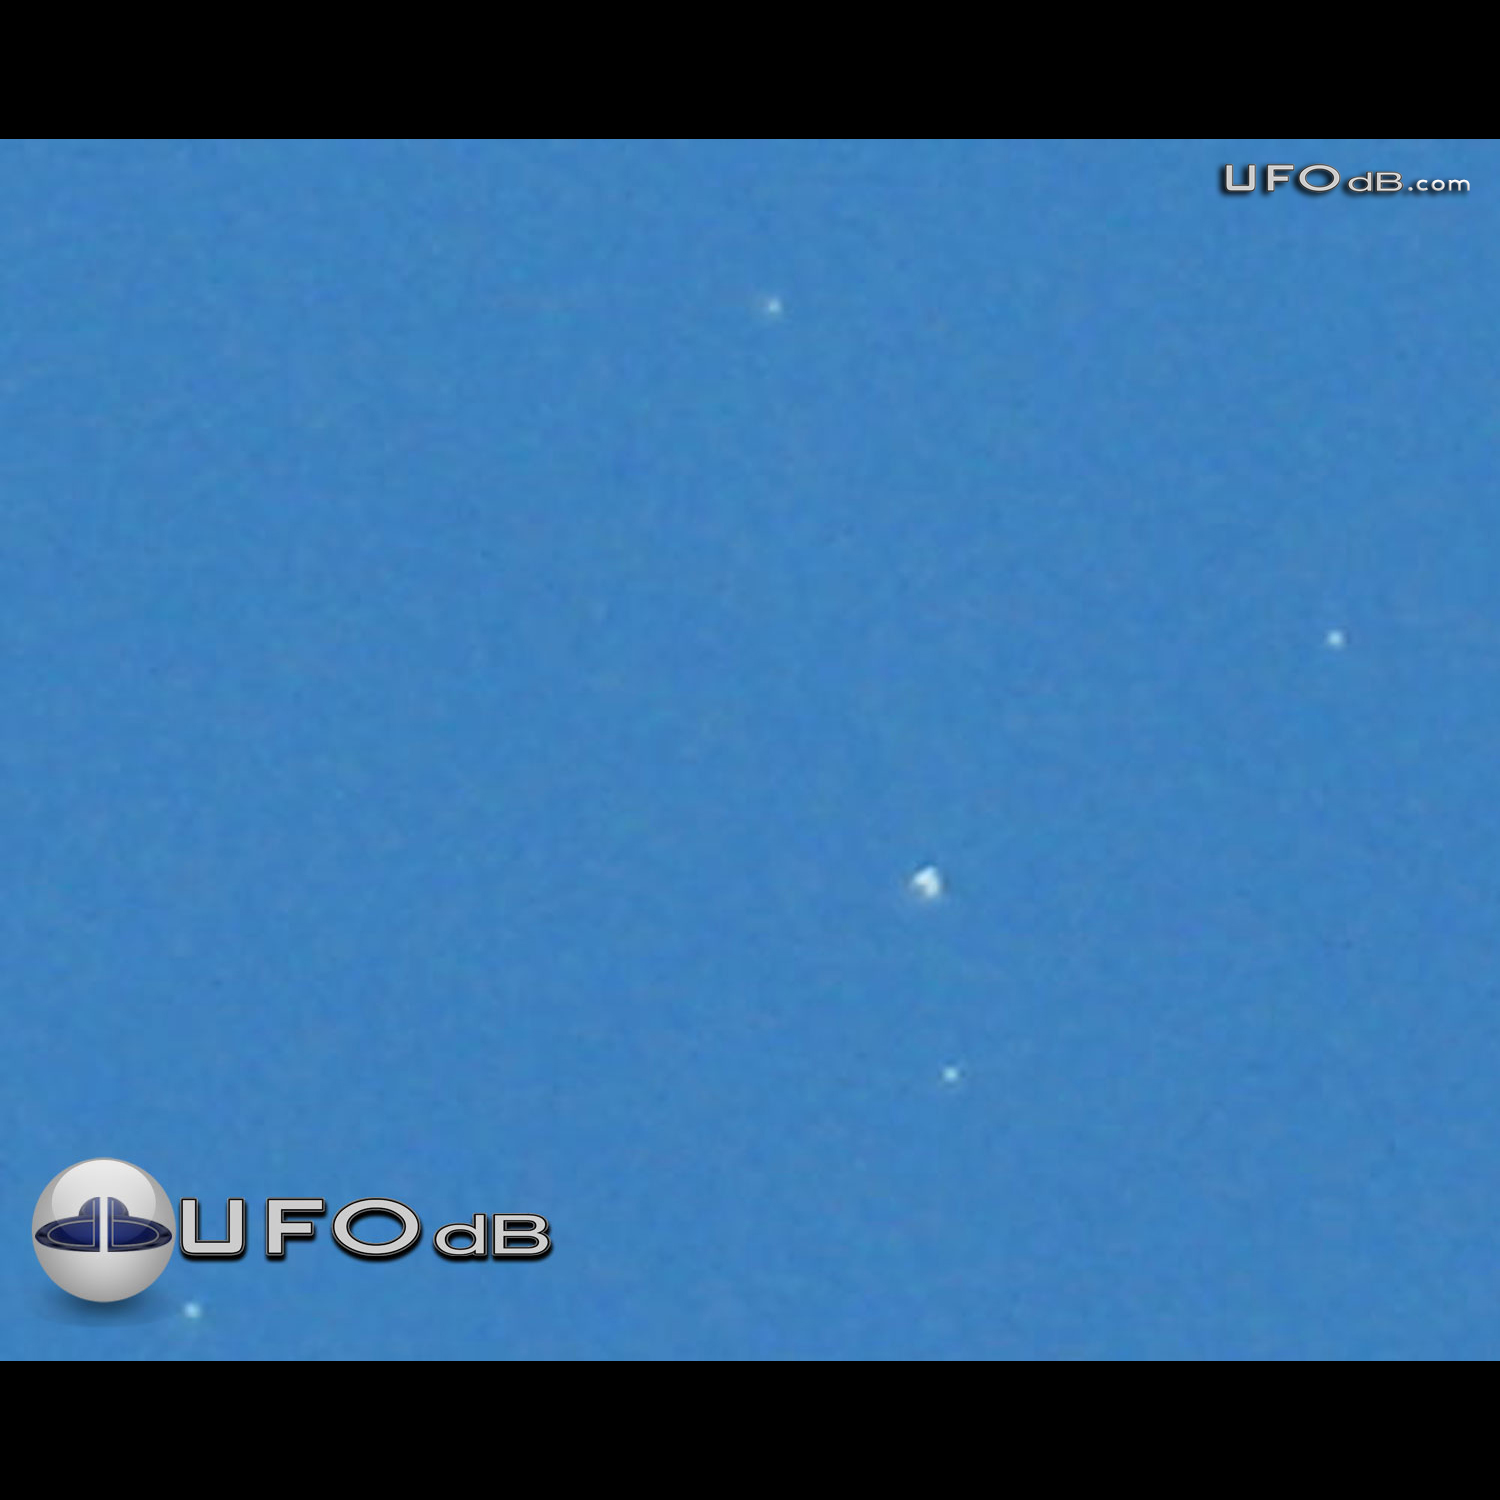 Five Apparent UFOs in the sky of Portland | Oregon, USA | May 1 2011 UFO Picture #314-1